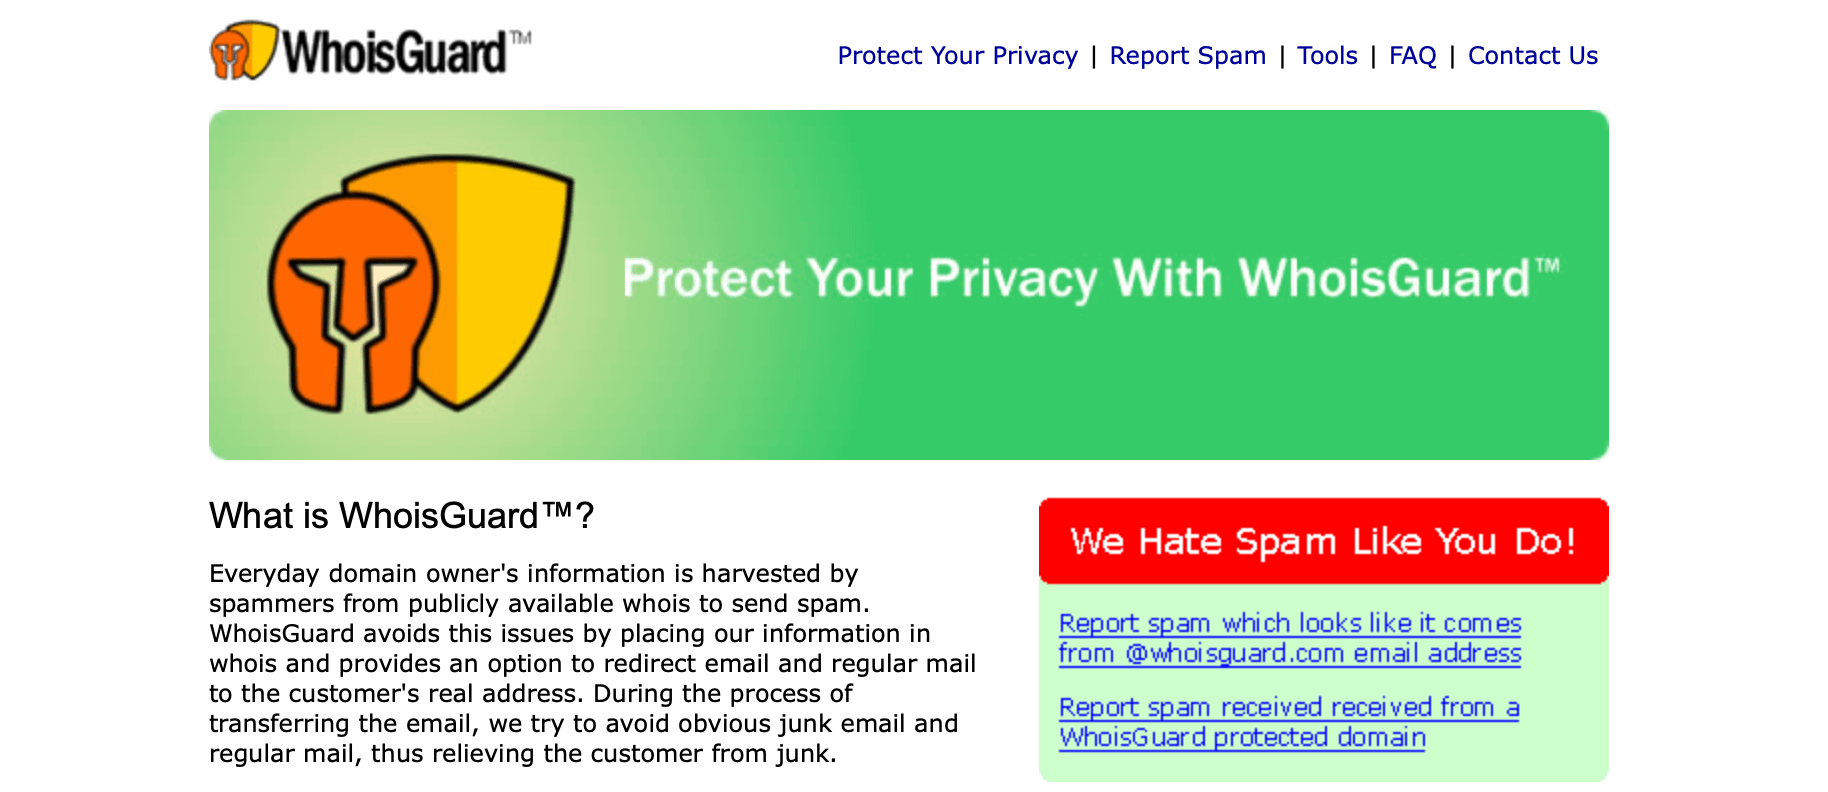 The WhoisGuard website.